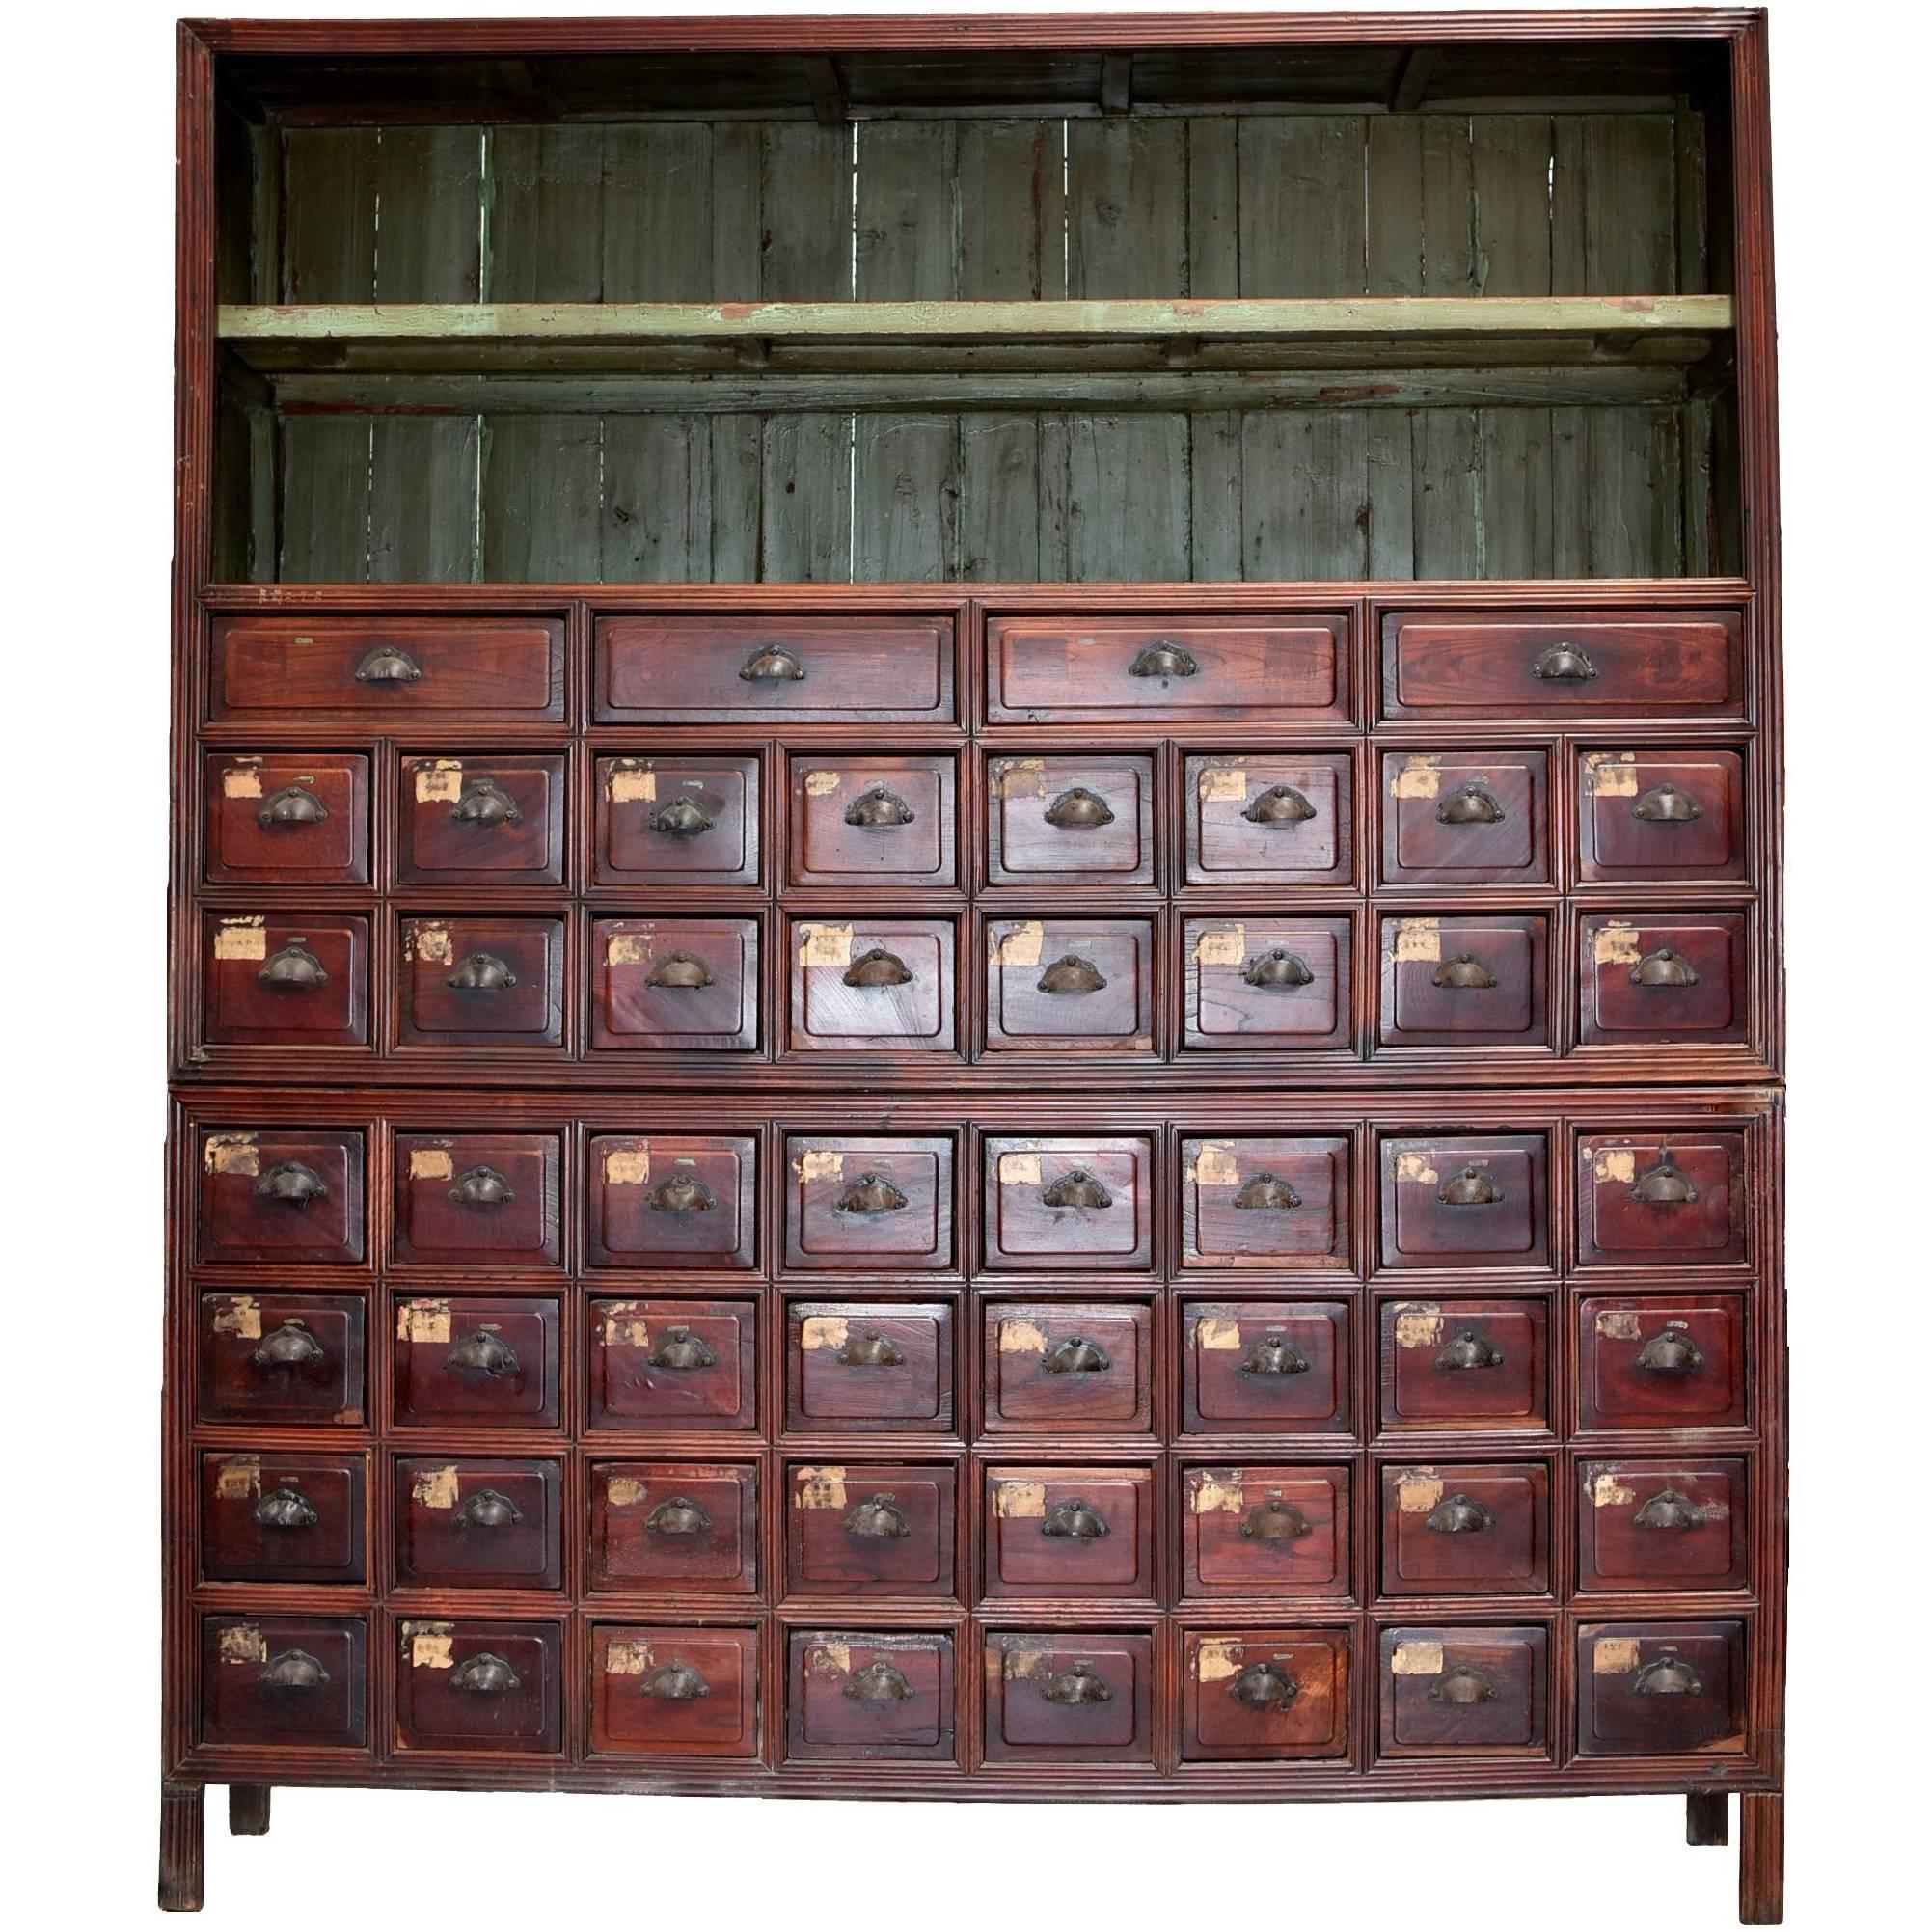 Monumental Chinese Apothecary Chest, 87" Tall with 52 Drawers